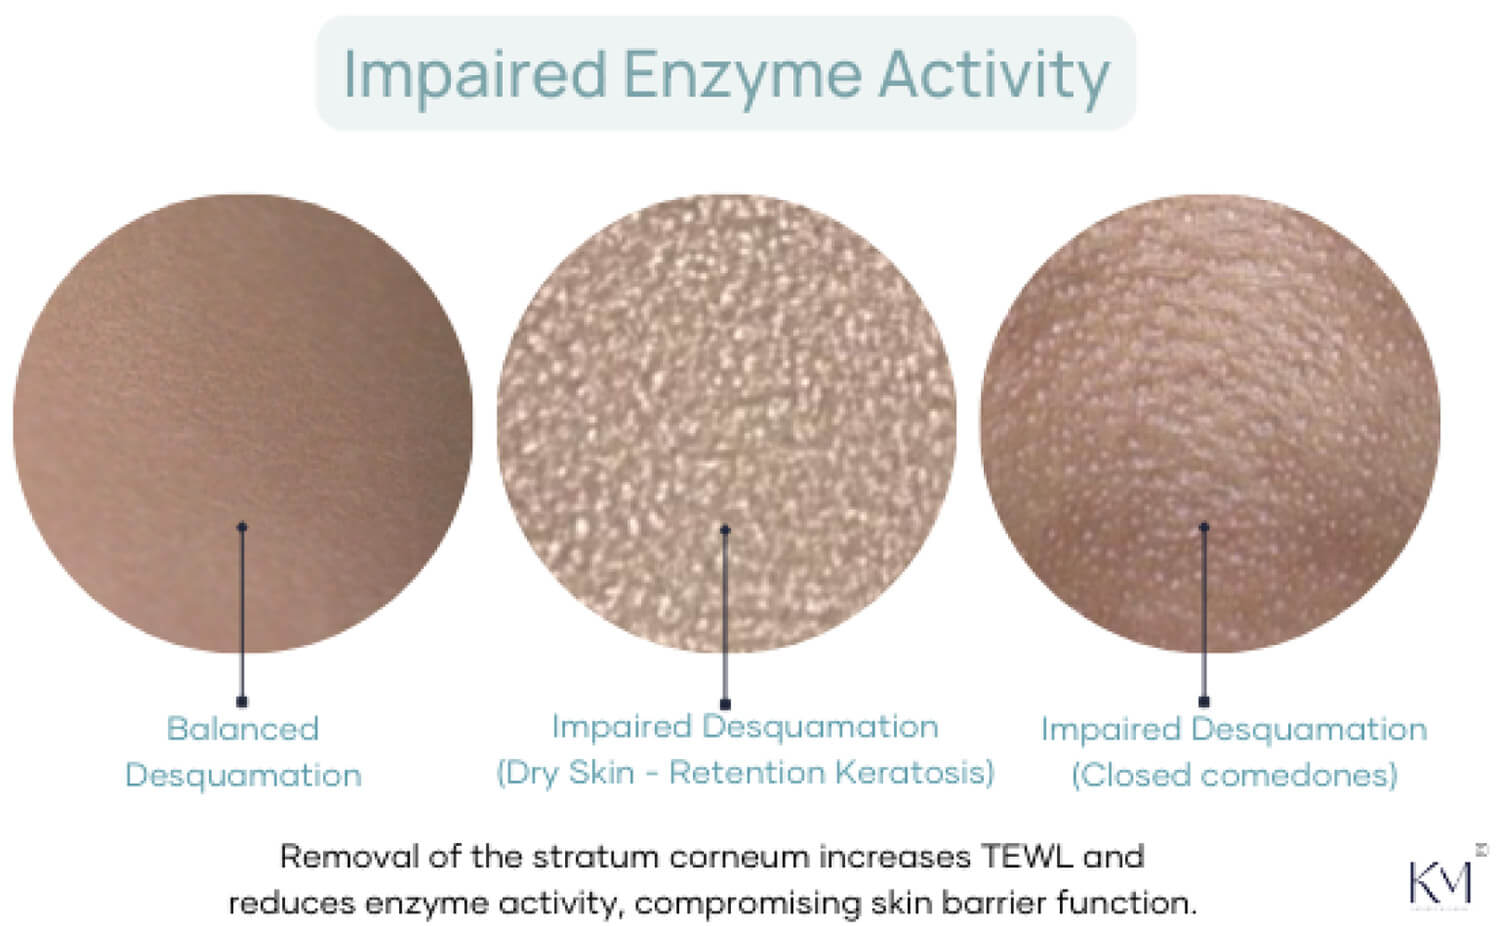 Impaired Enzyme Activity